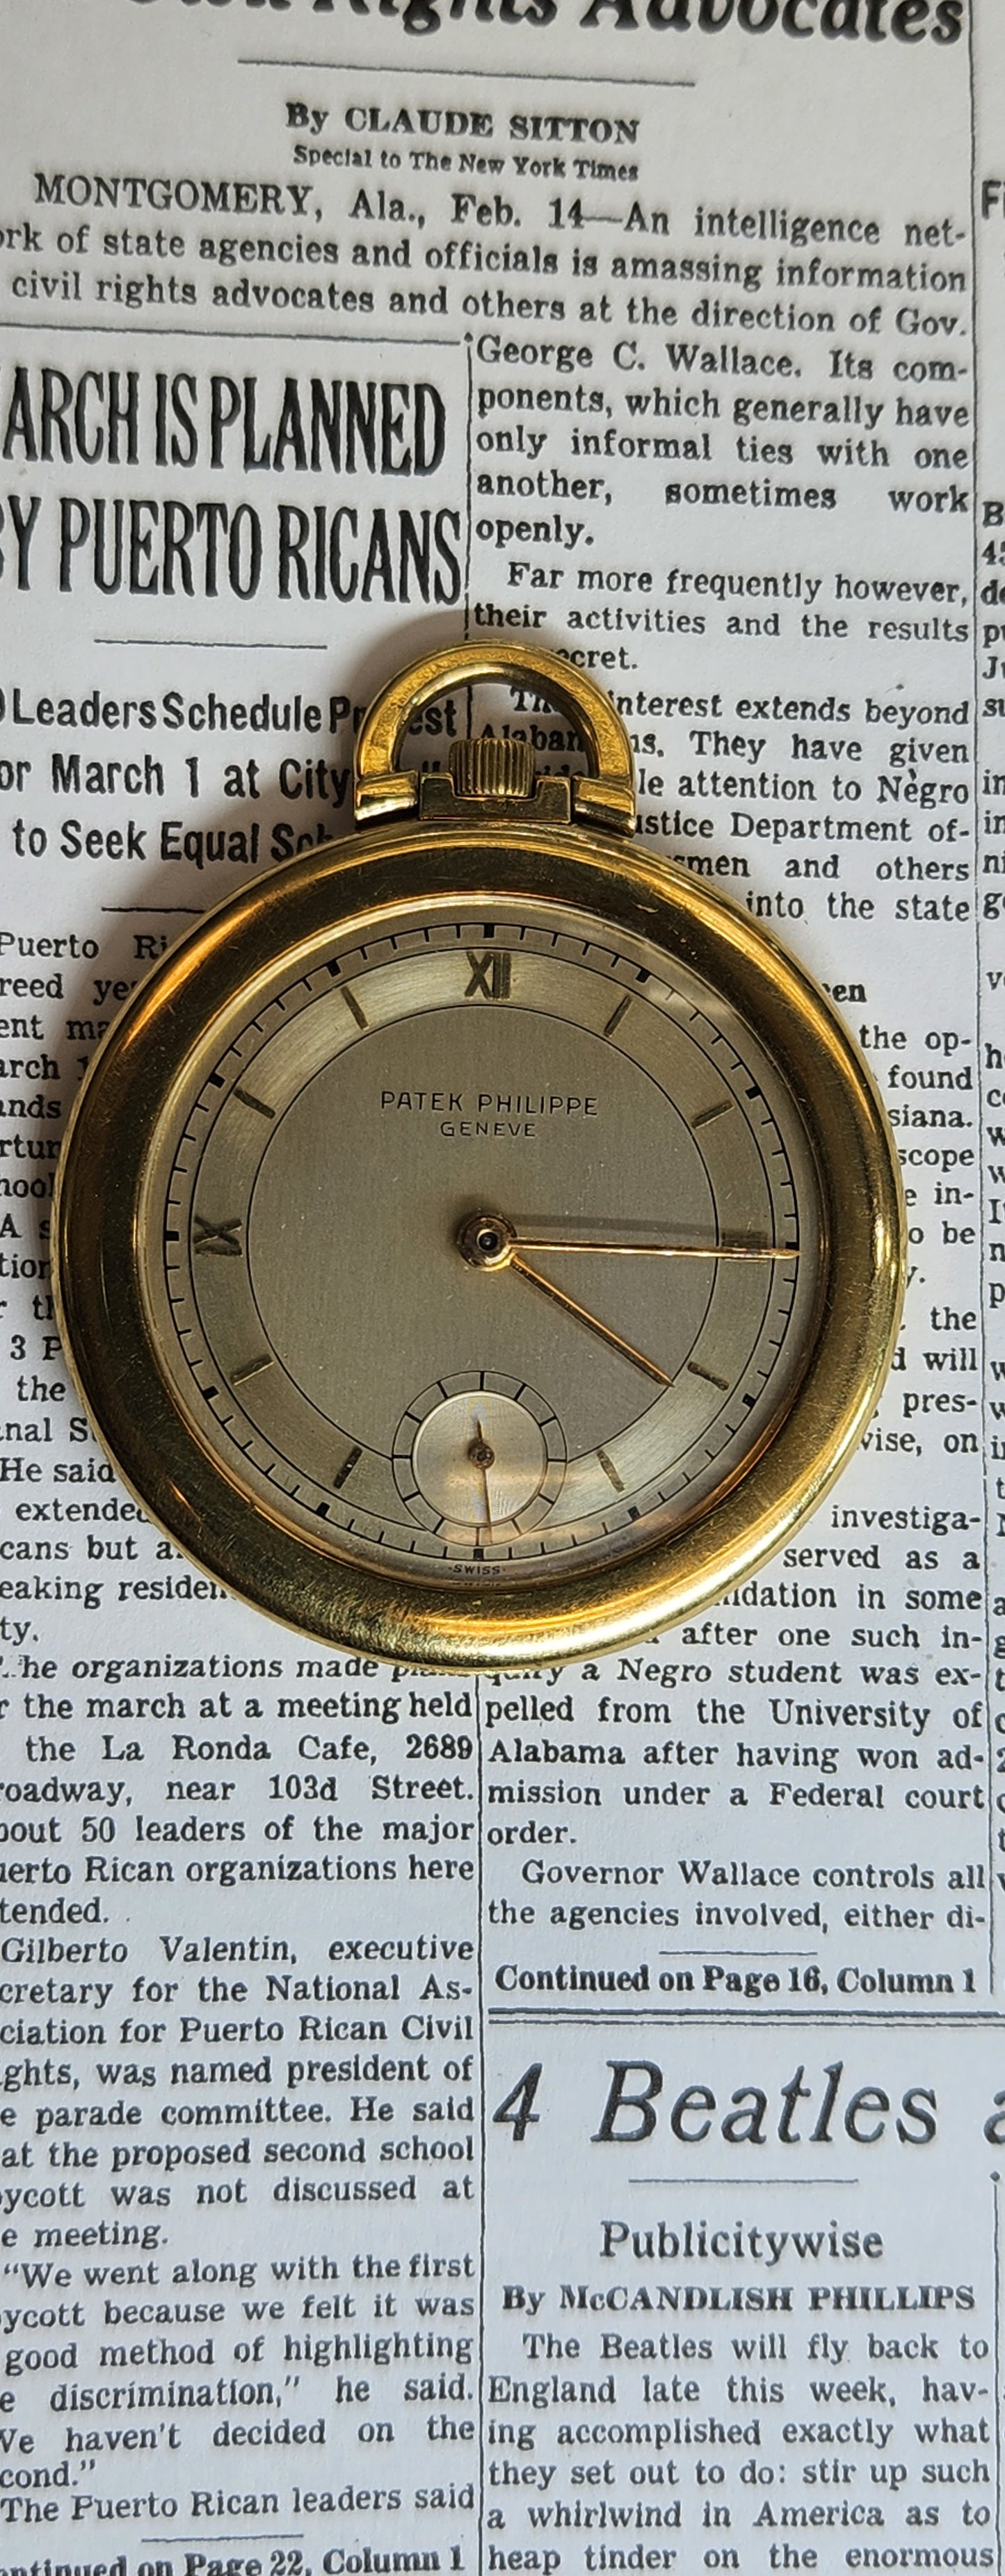 Patek Philippe pocket watch 18kt open face from the 1930's